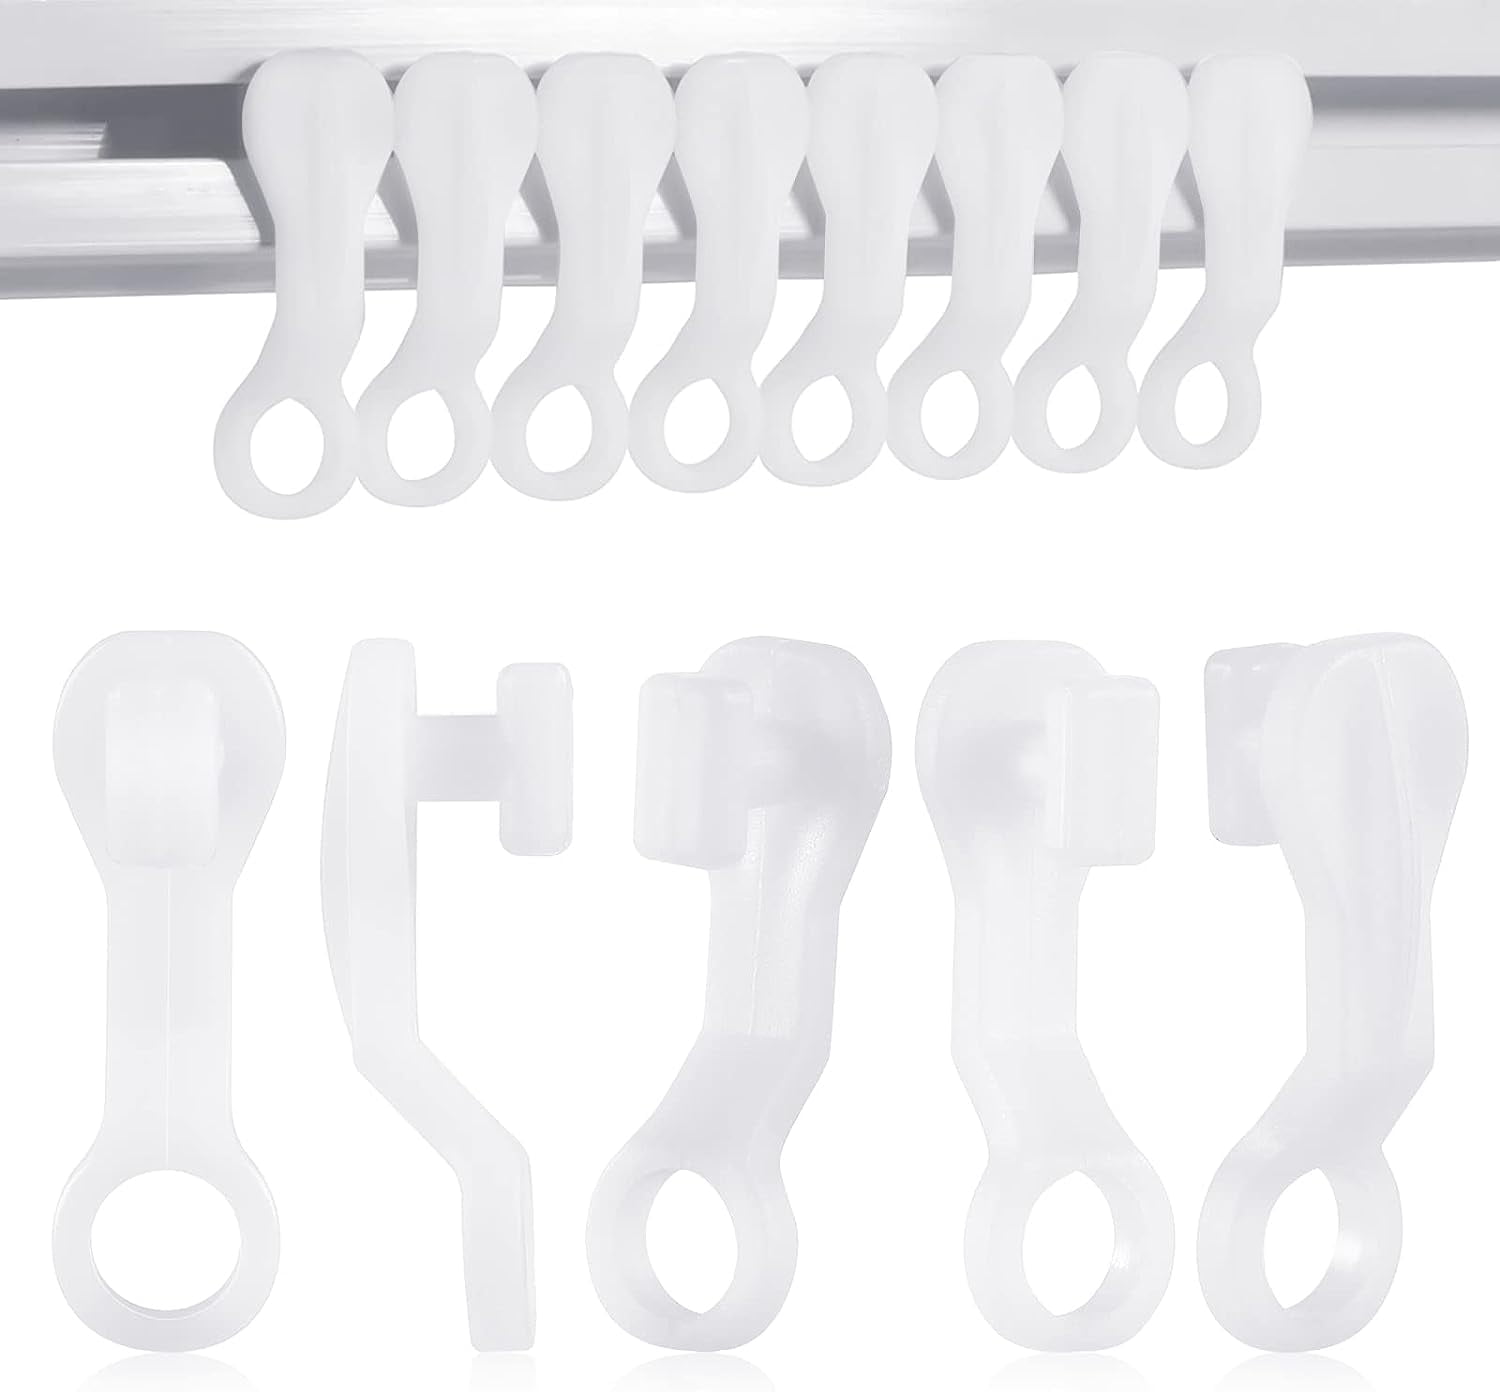 100 Pieces Curtain Hooks For Tracks, 10mm Curtain Gliders, White Plastic  Curtain Rollers [xc]